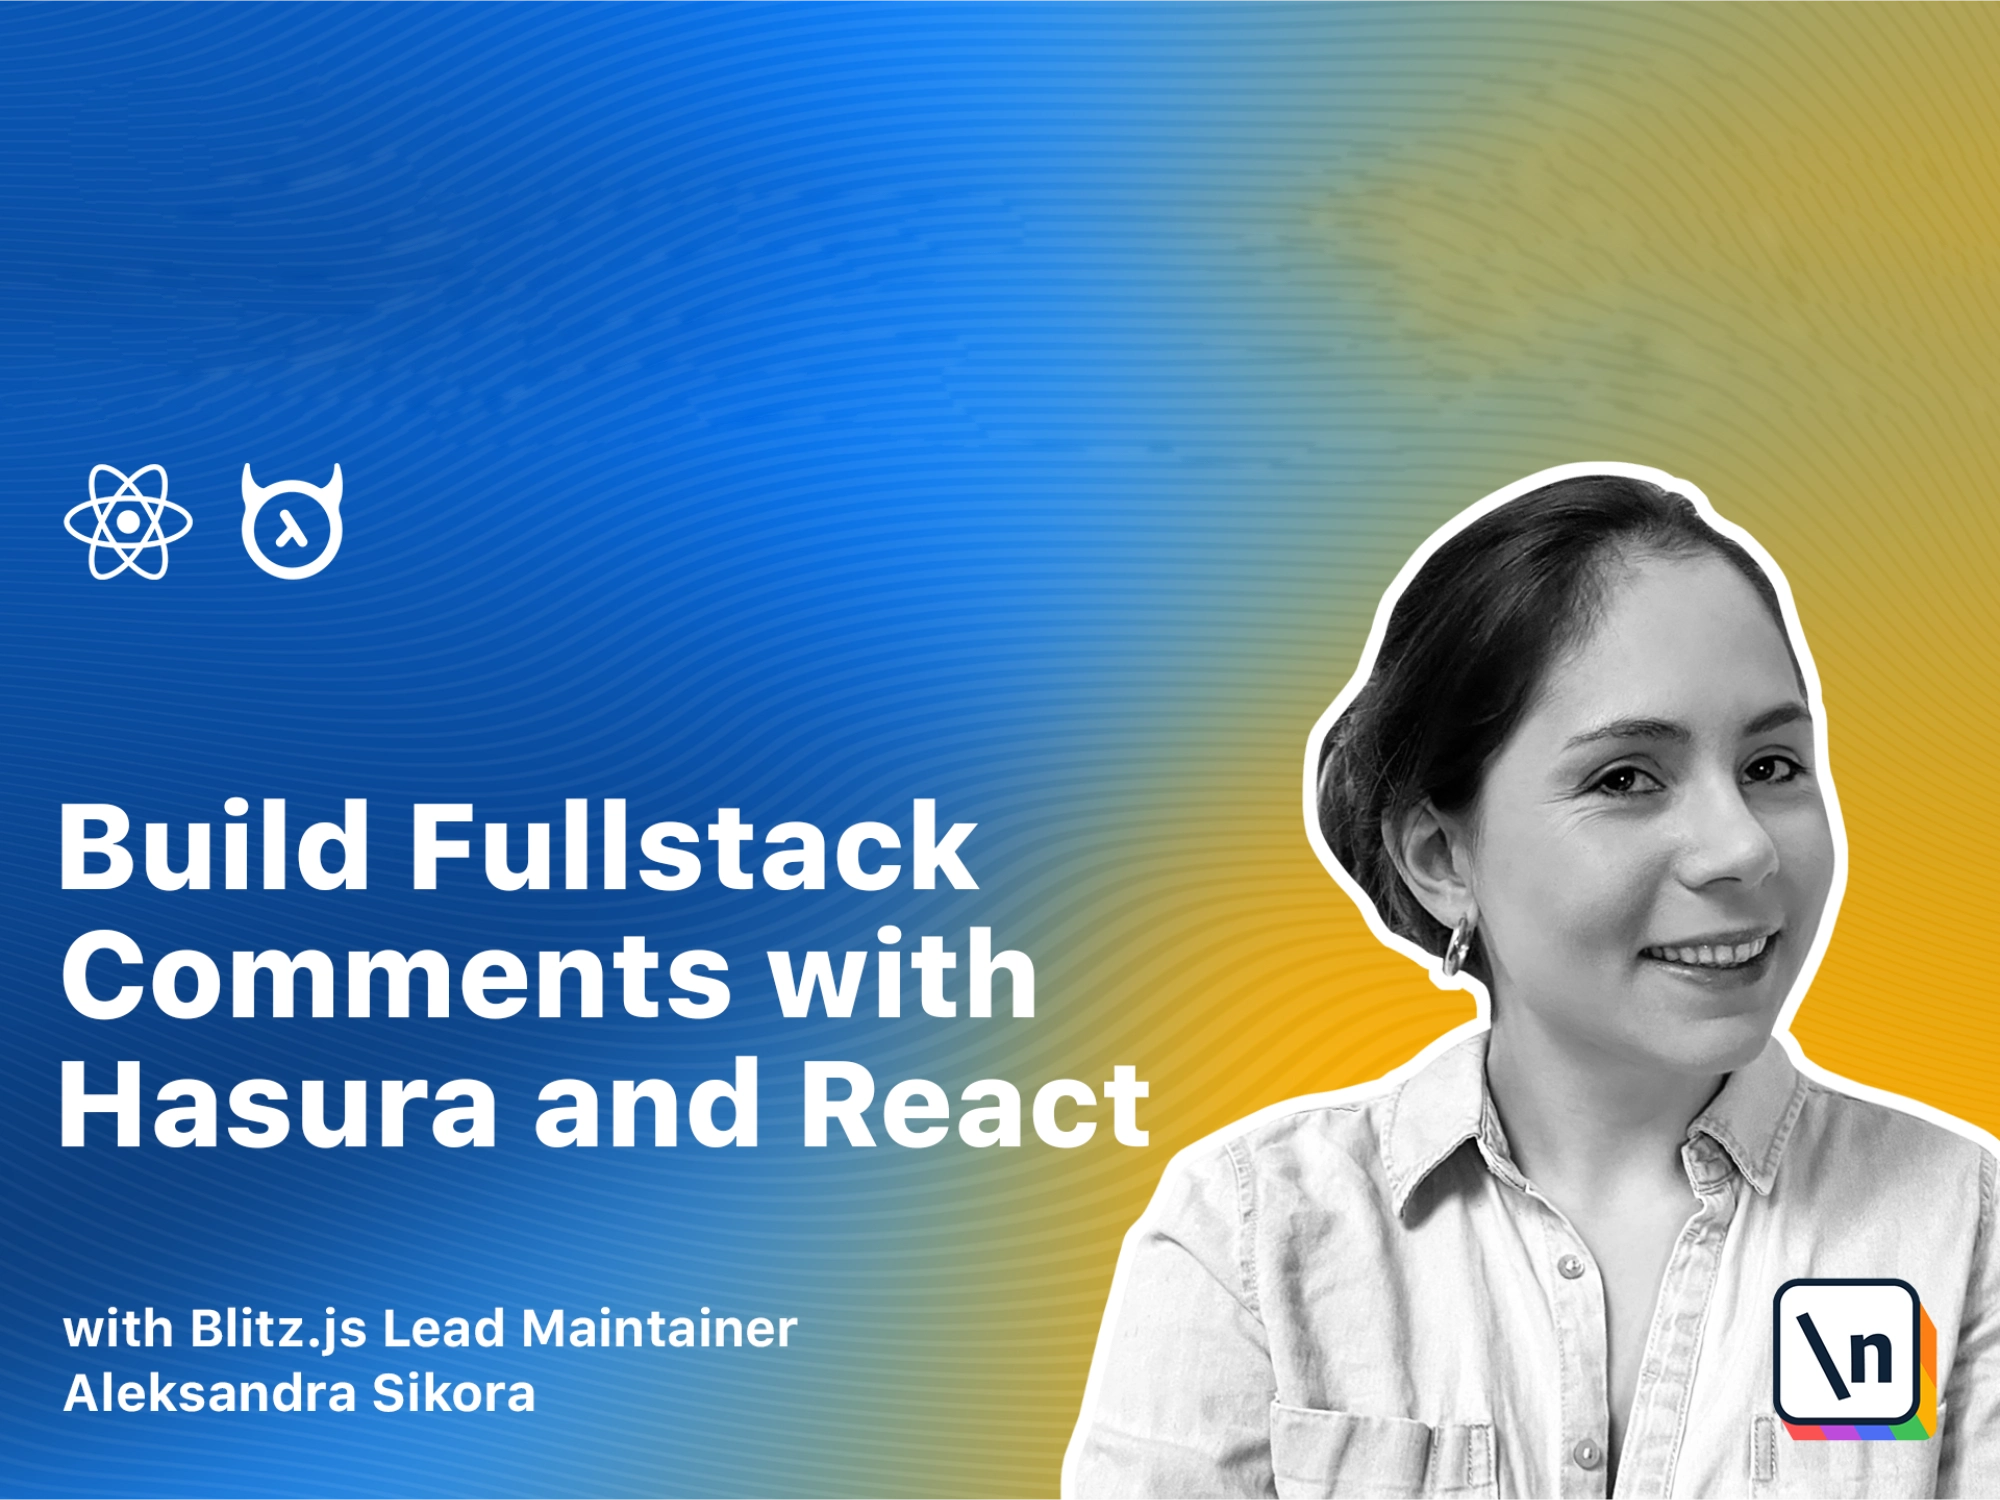 [VIP] Newline: Full Stack Comments with Hasura and React